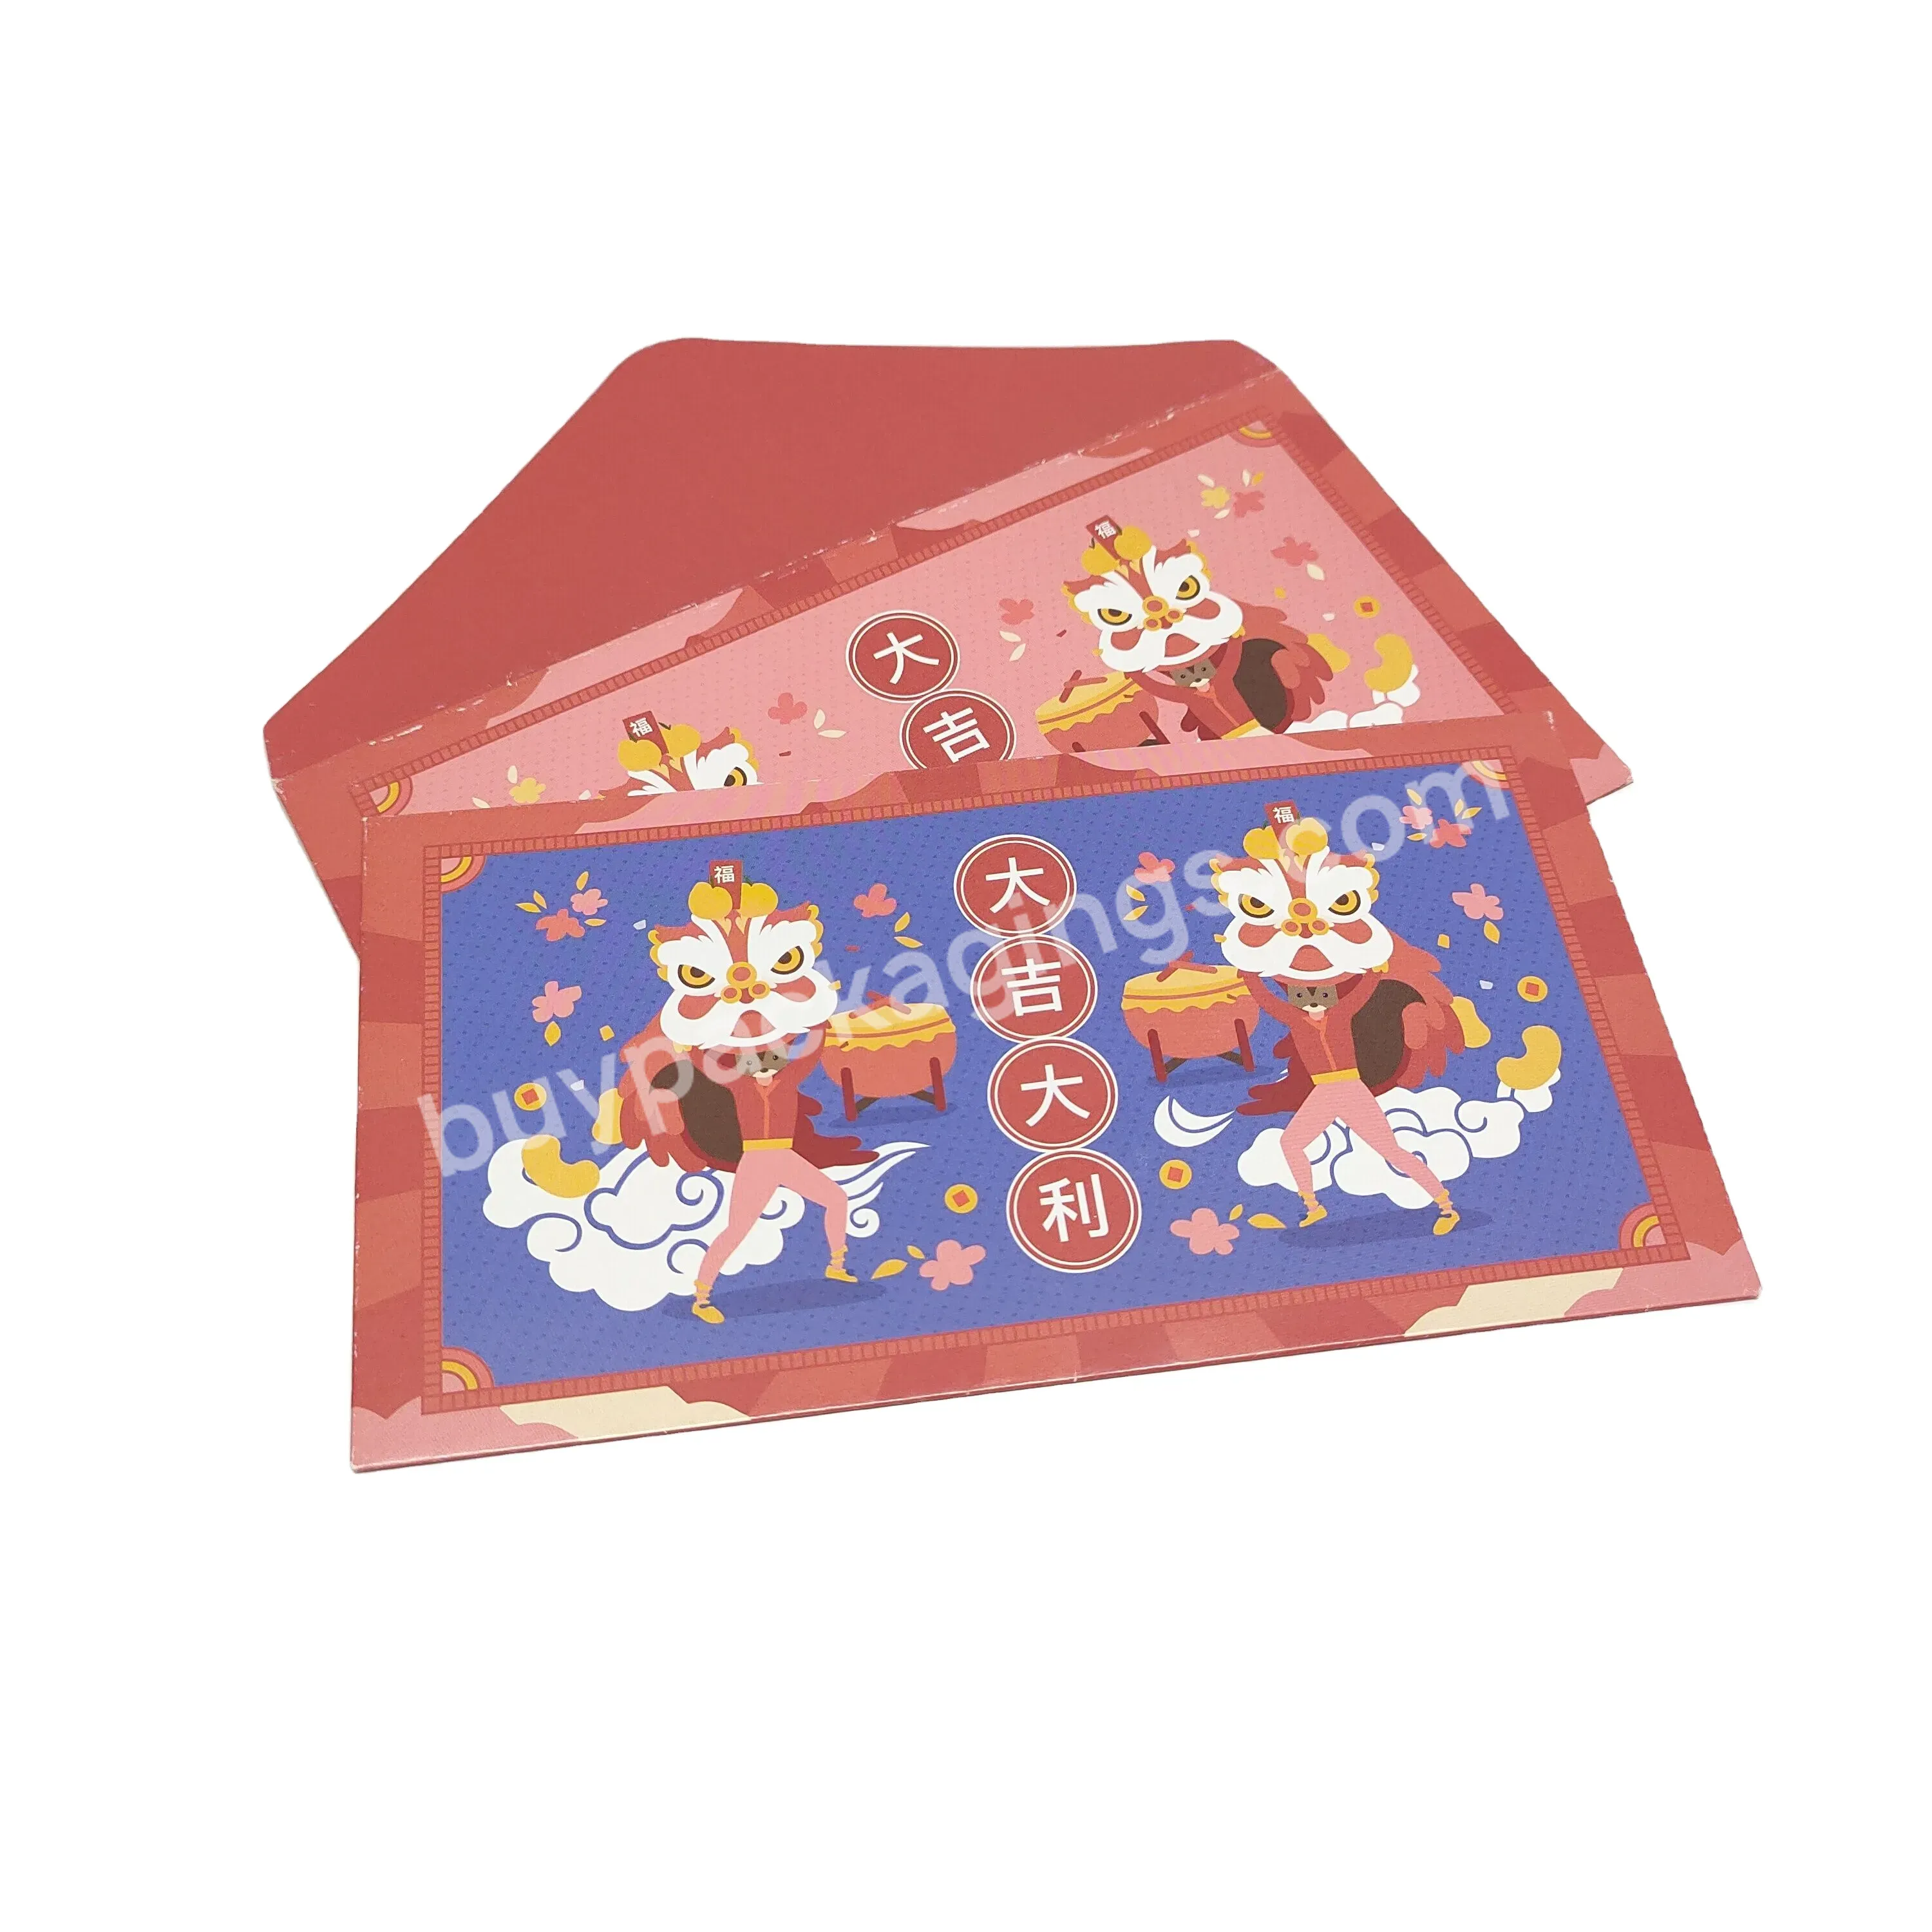 Custom Printing Red Luxury Gold Foil Chinese Paper Wallet Envelopes